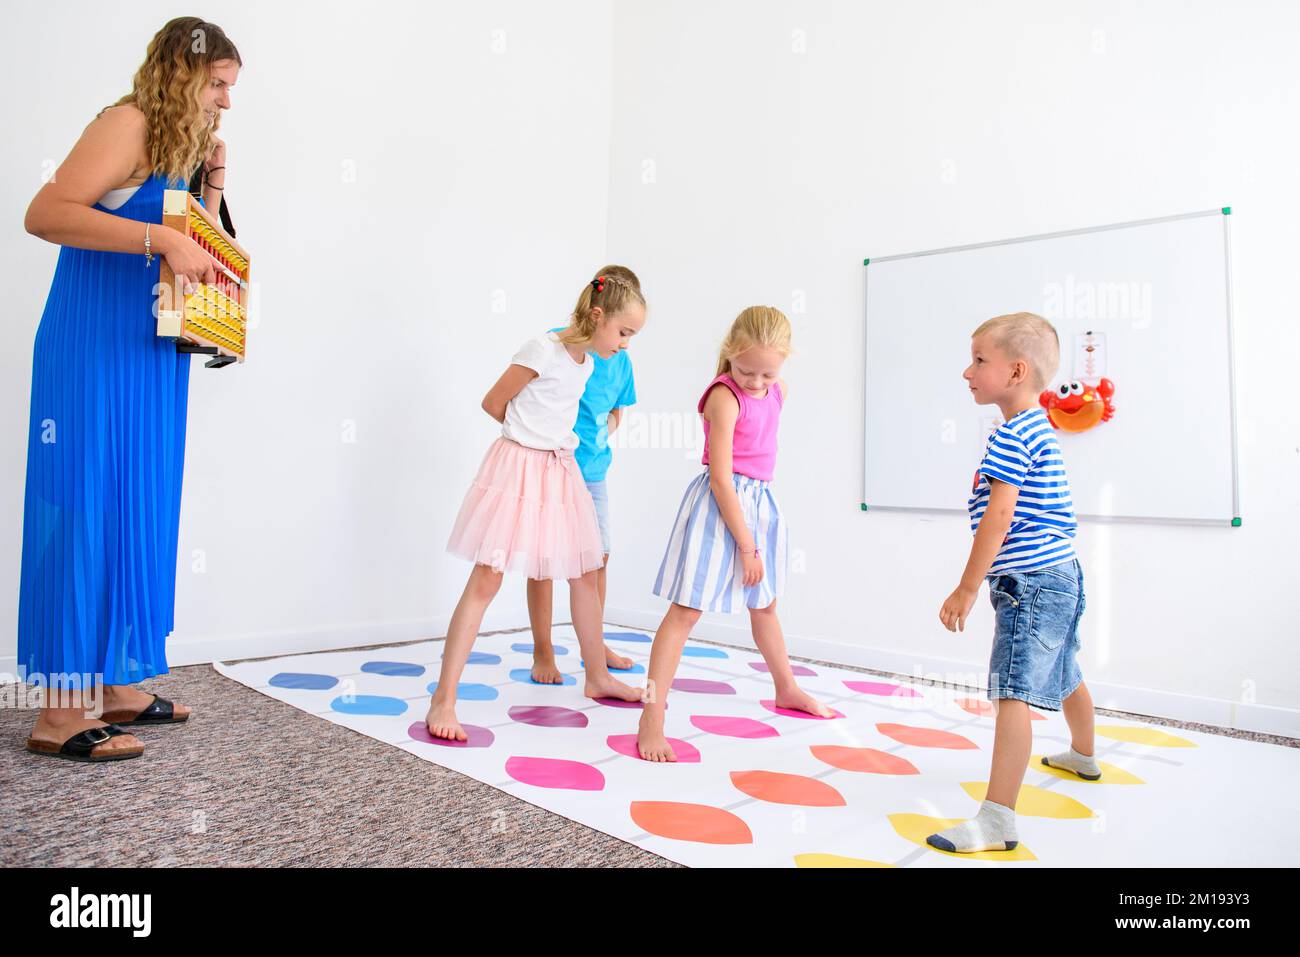 Child occupational therapy session. Group of children doing playful exercises with their therapist. Stock Photo